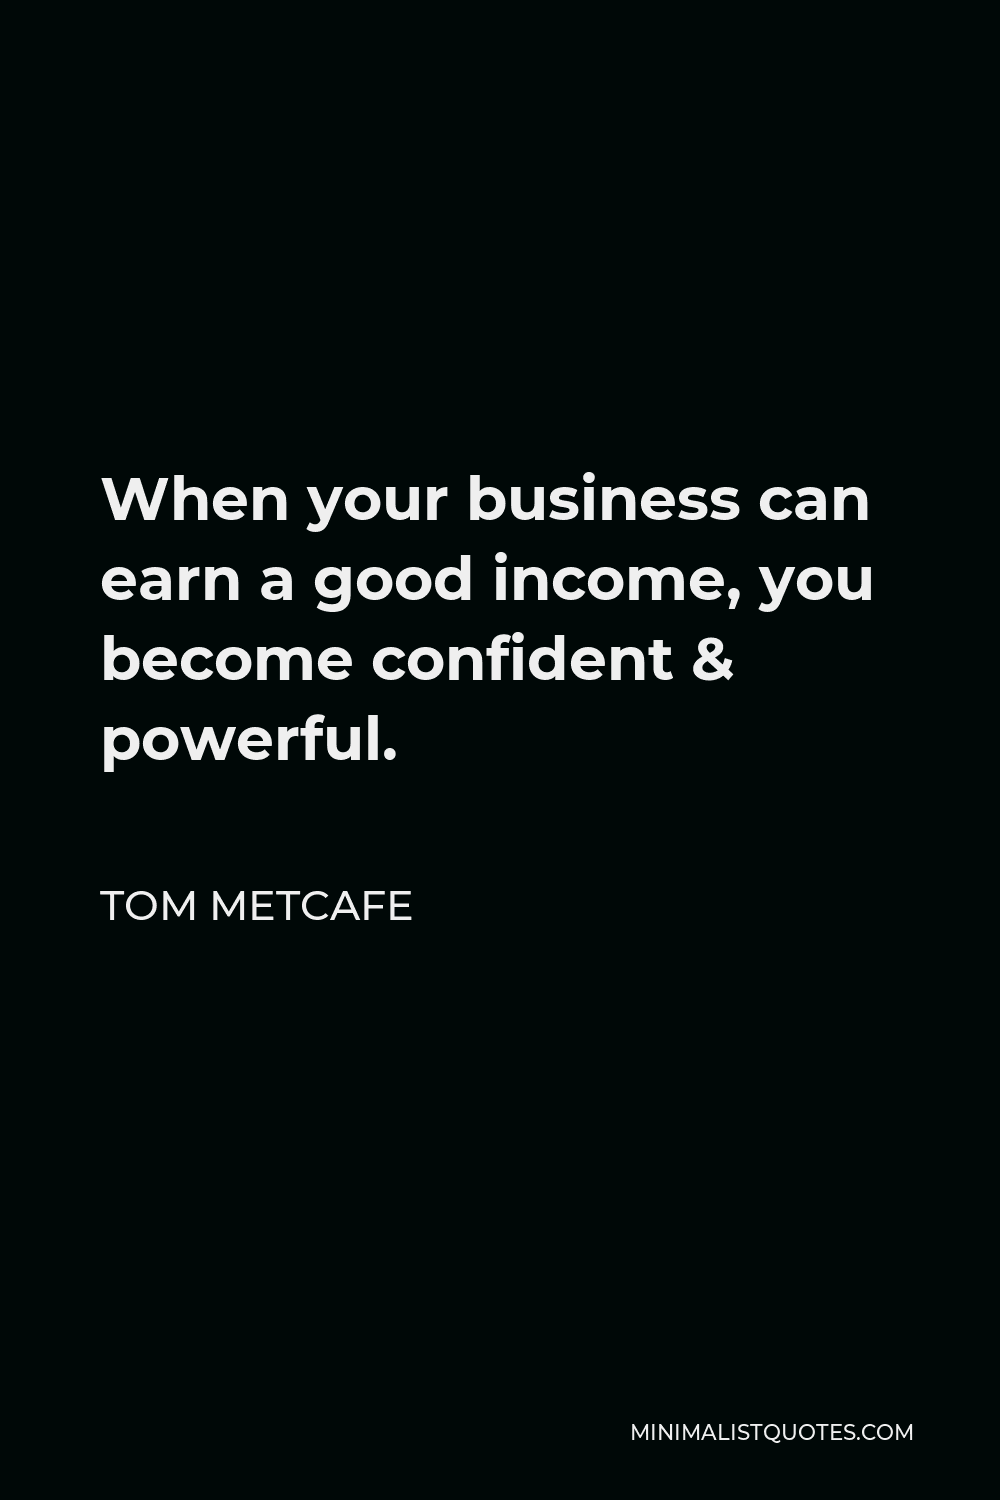 Tom Metcafe Quote - When your business can earn a good income, you become confident & powerful.